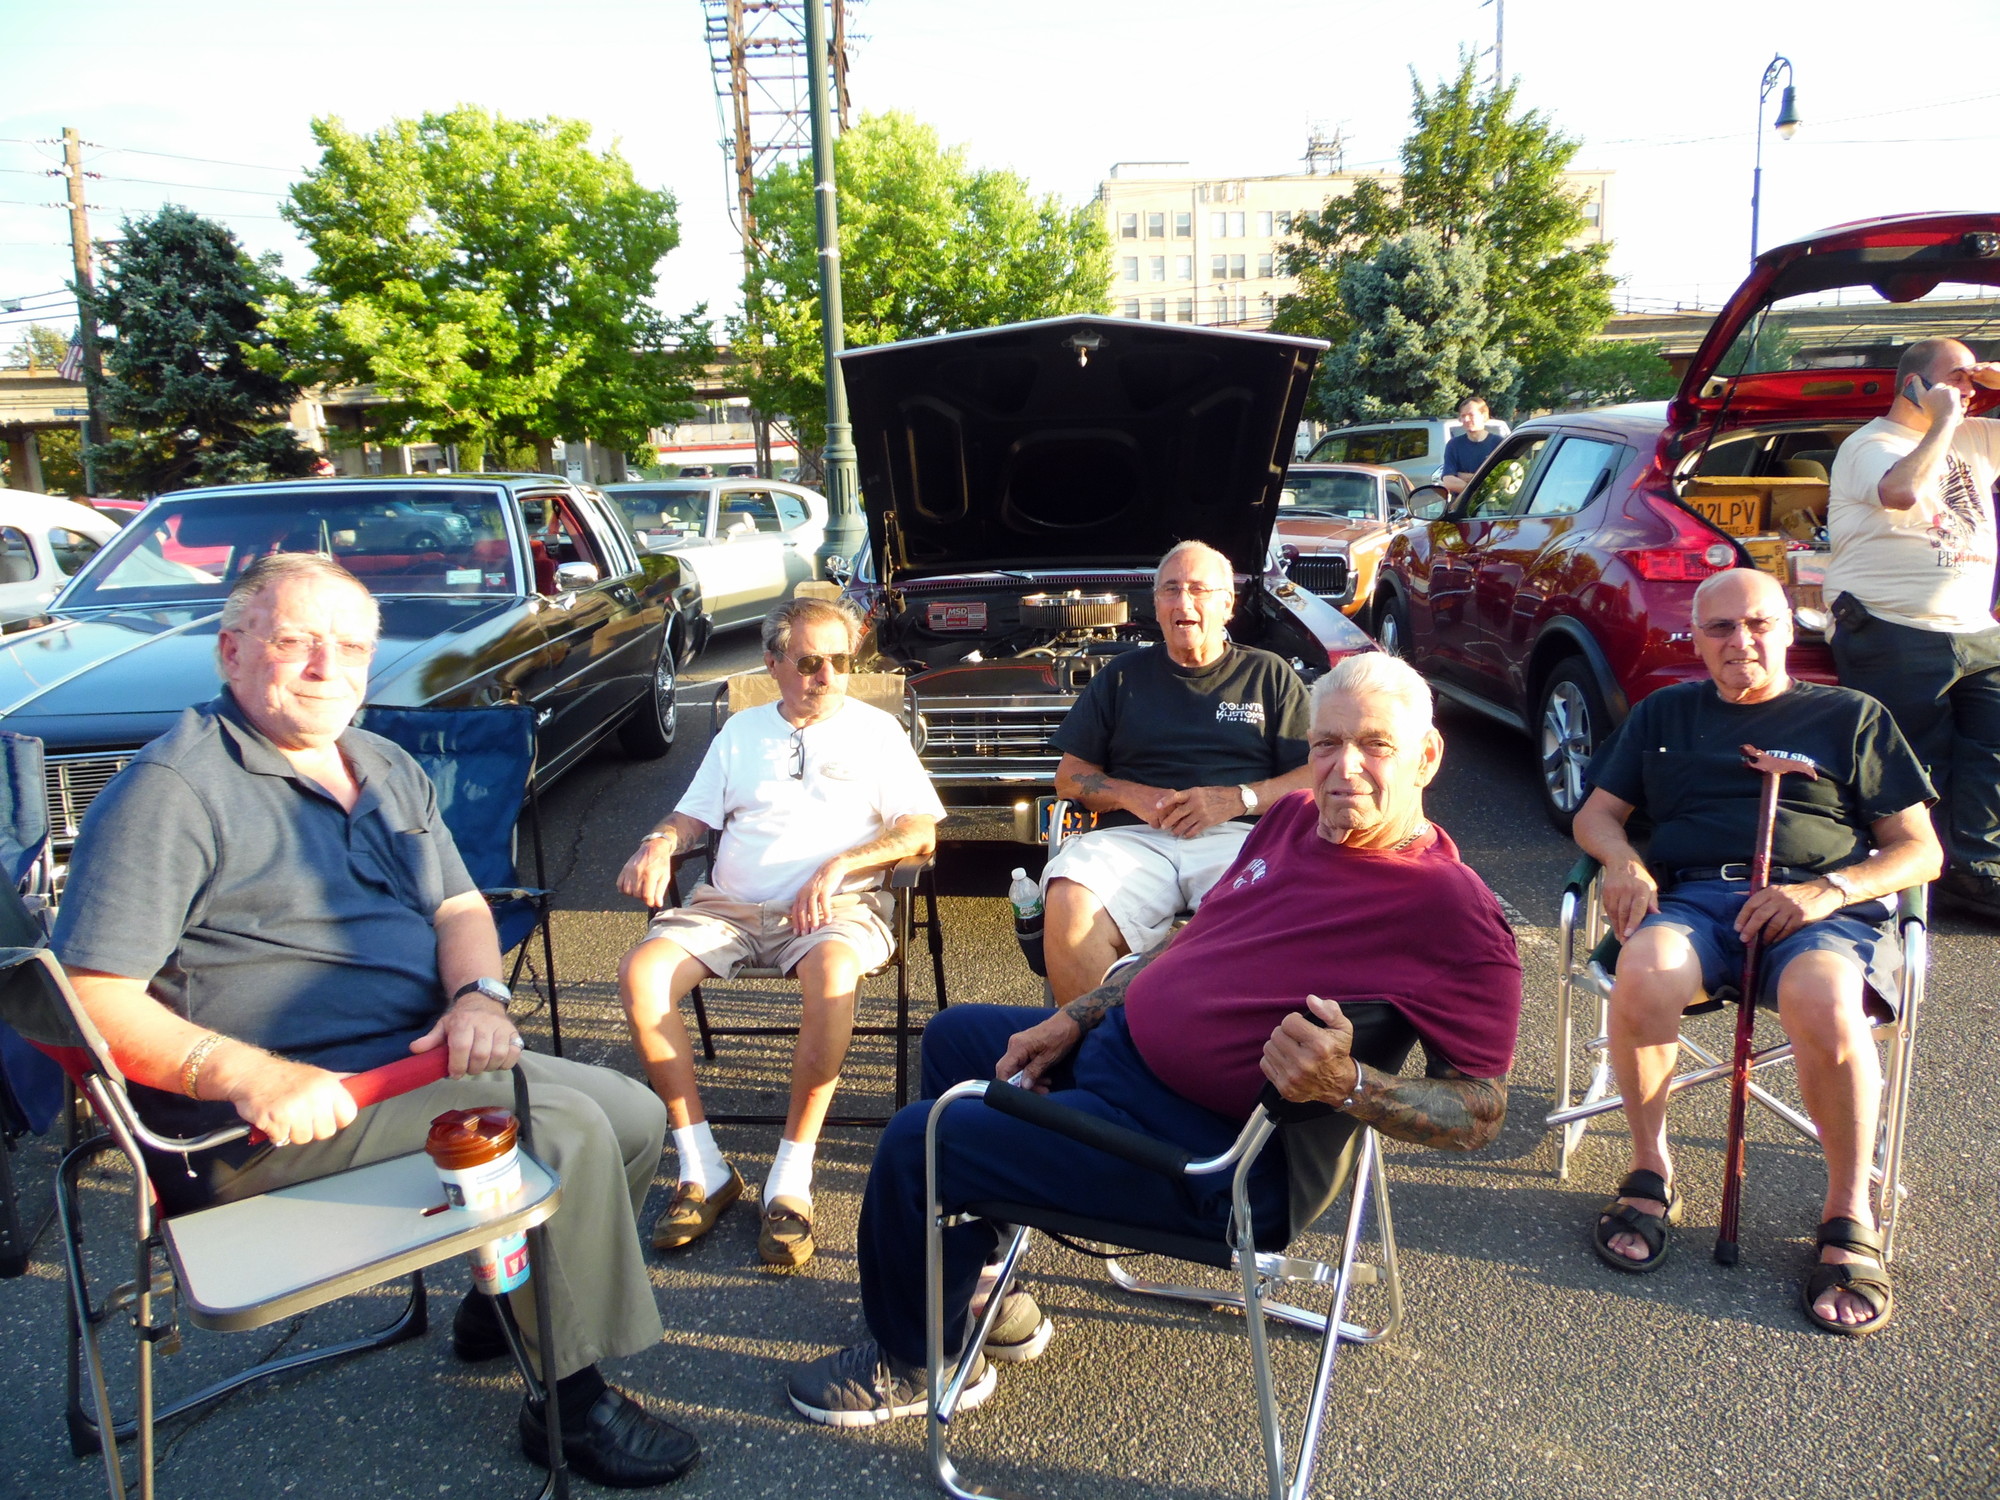 Members of the South Side Boys enjoyed the car show and the company while seated in front of Joe Fish’s 1967 Chevy. Pictured from left were Mario DiMaria, Anthony Ristua, Joe Fish, Nino Spataro, and Joe Tattoo.